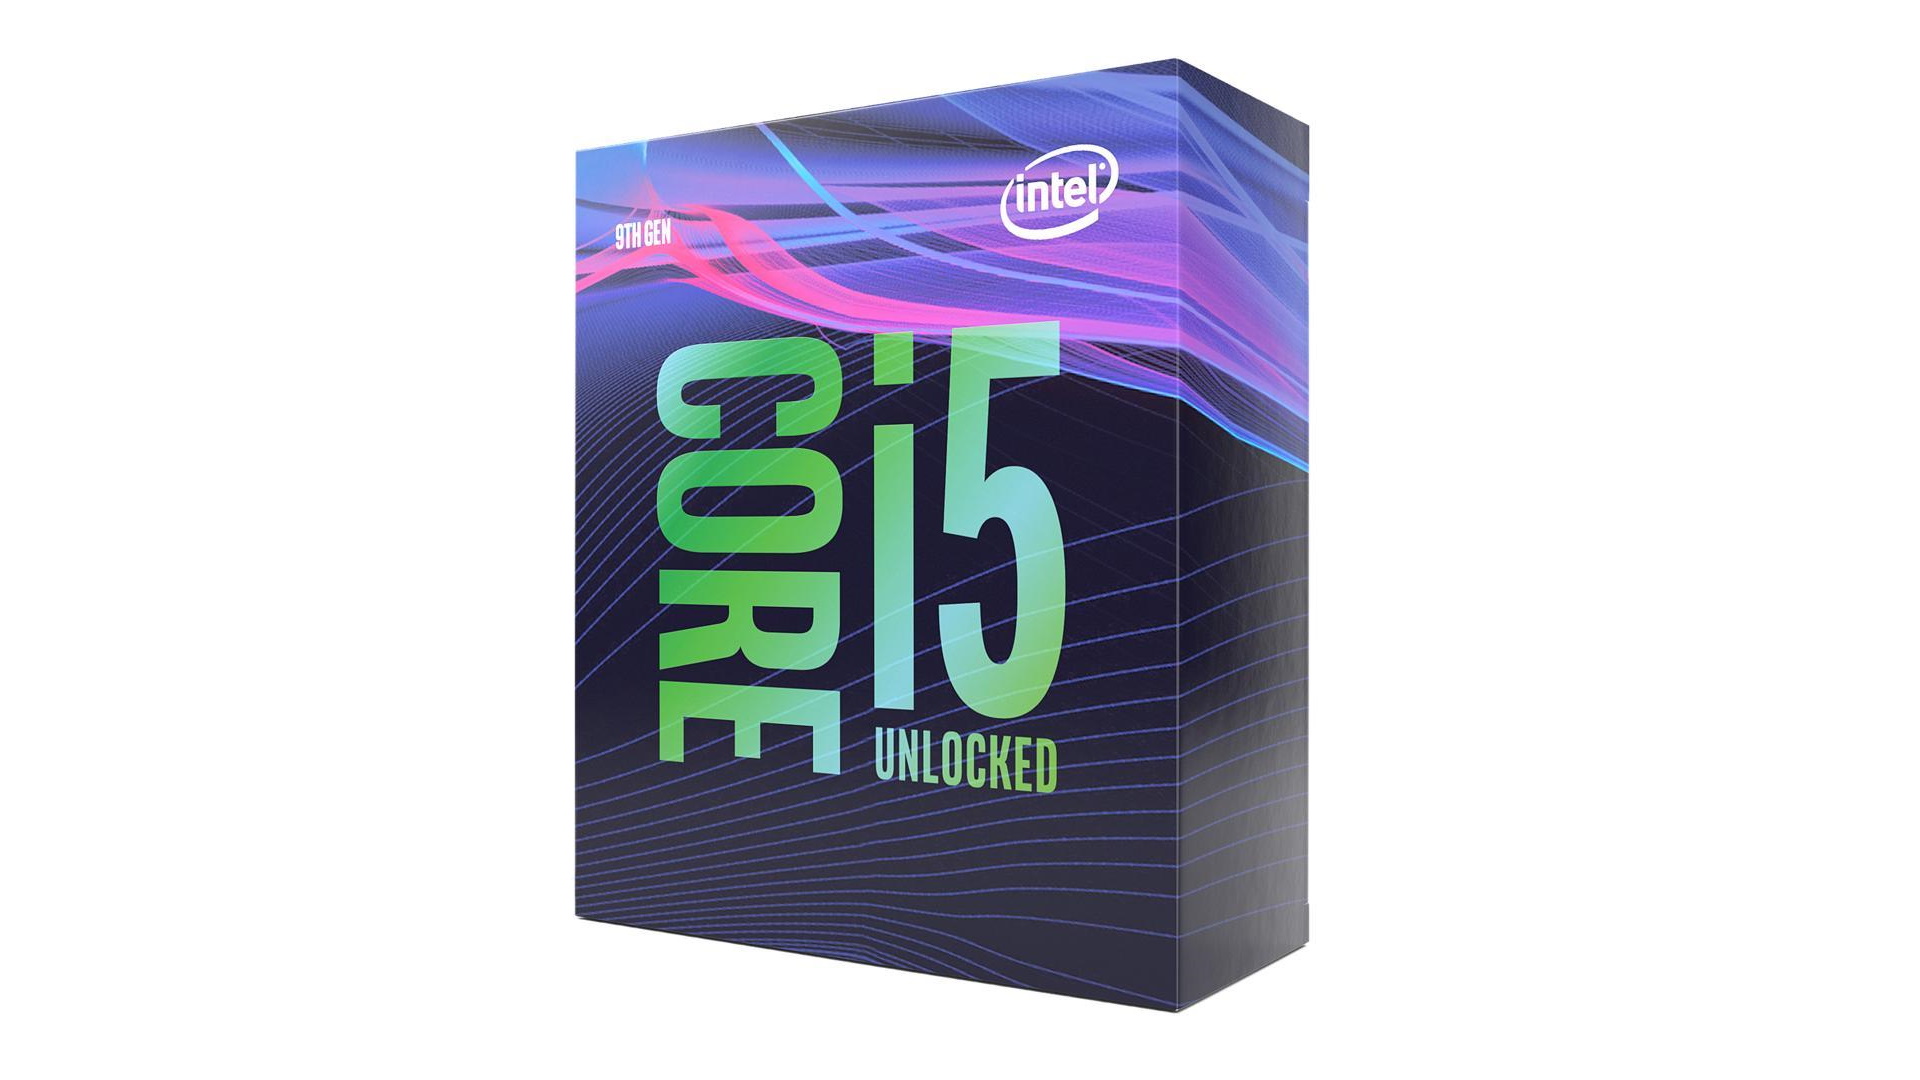 Intel's Core i5 9600K is now up to 35% off